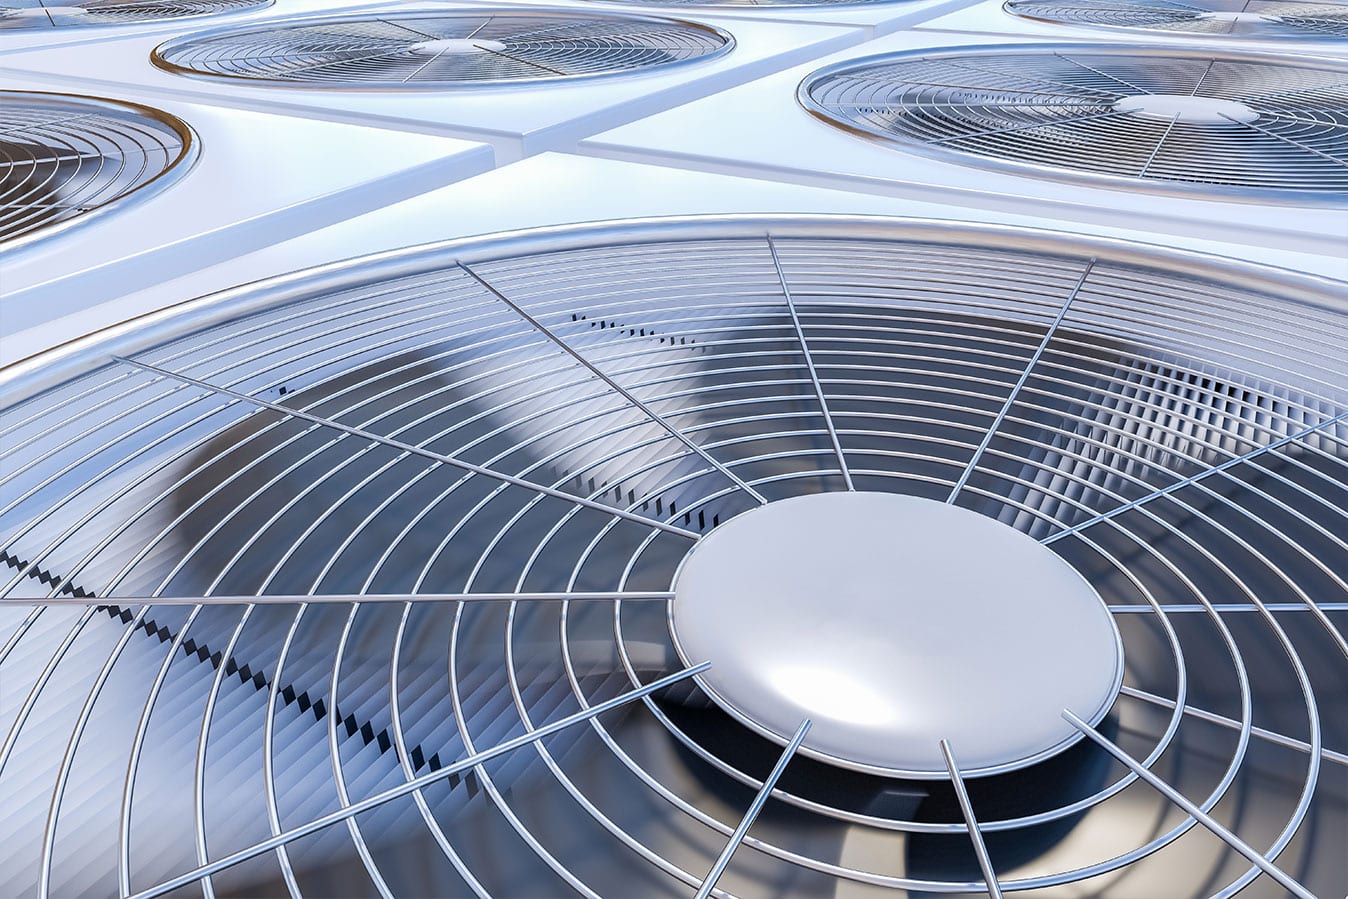 The Benefits of Spring Cleaning Your HVAC System